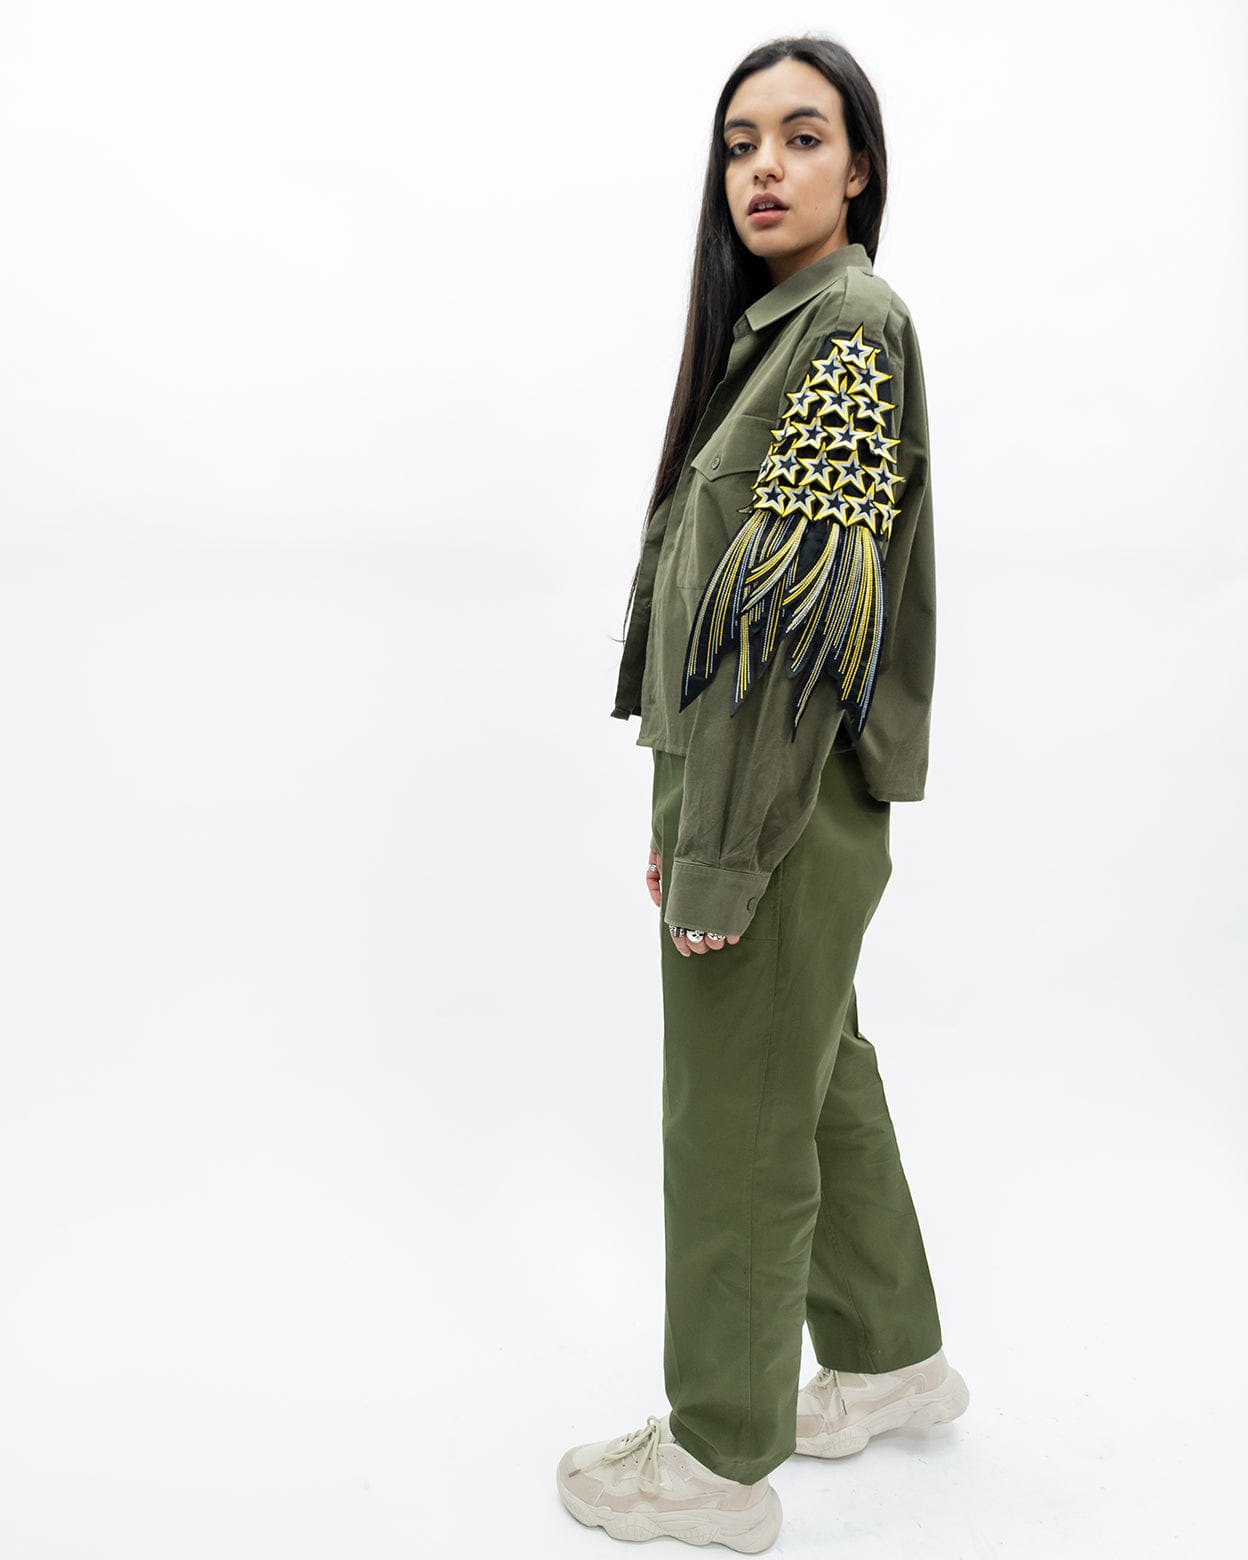 Star Arm Cropped Military Shirt